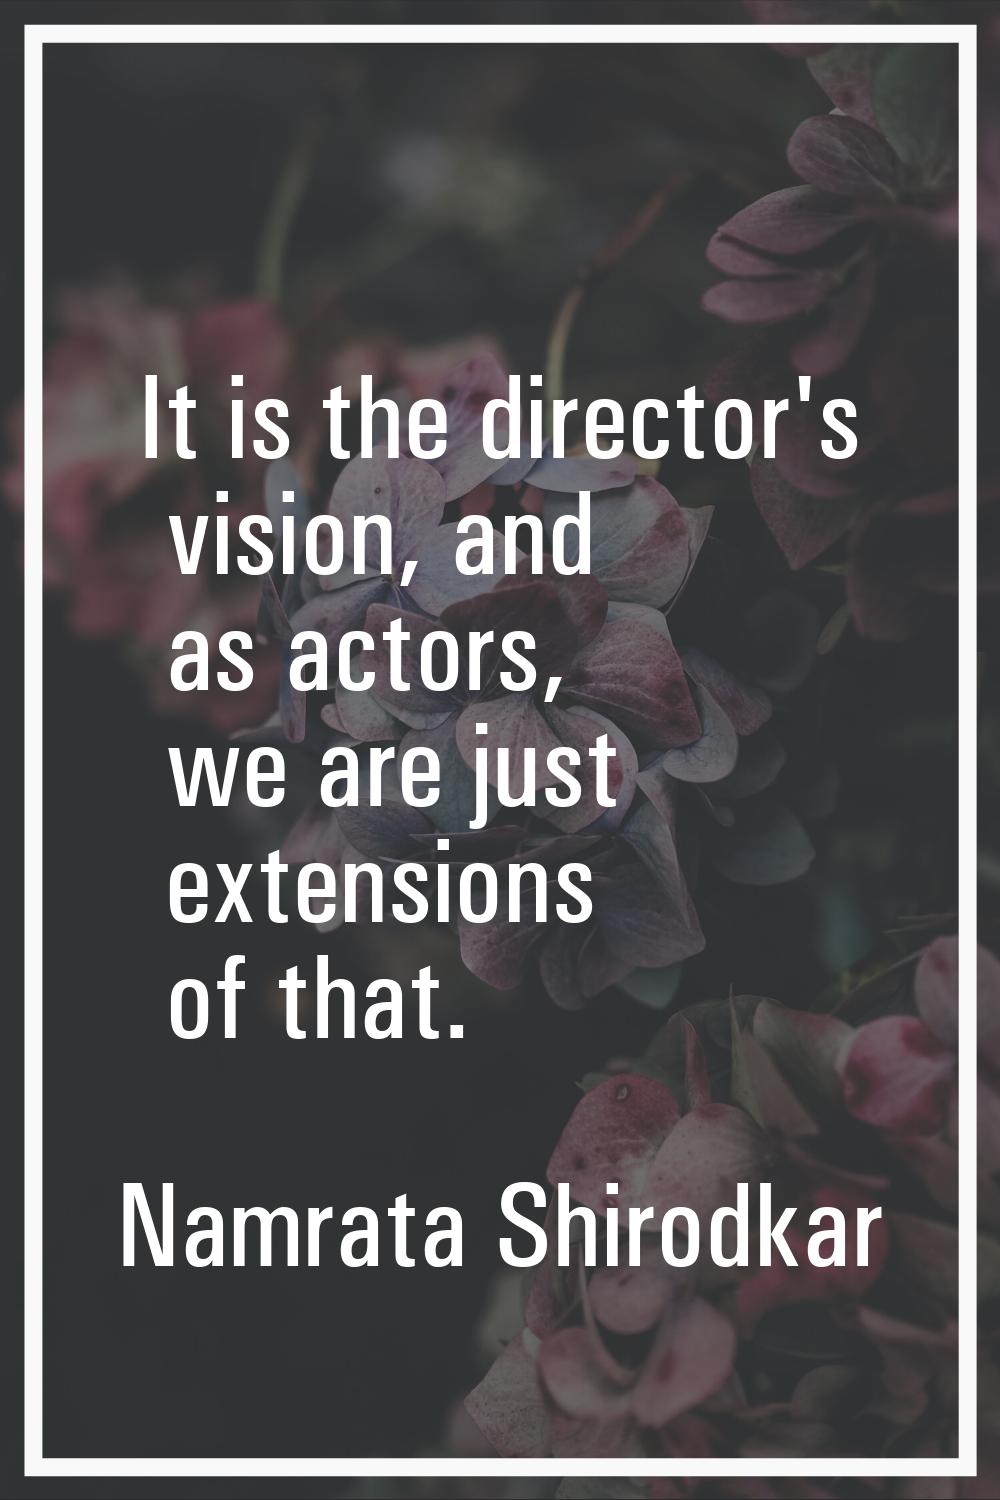 It is the director's vision, and as actors, we are just extensions of that.